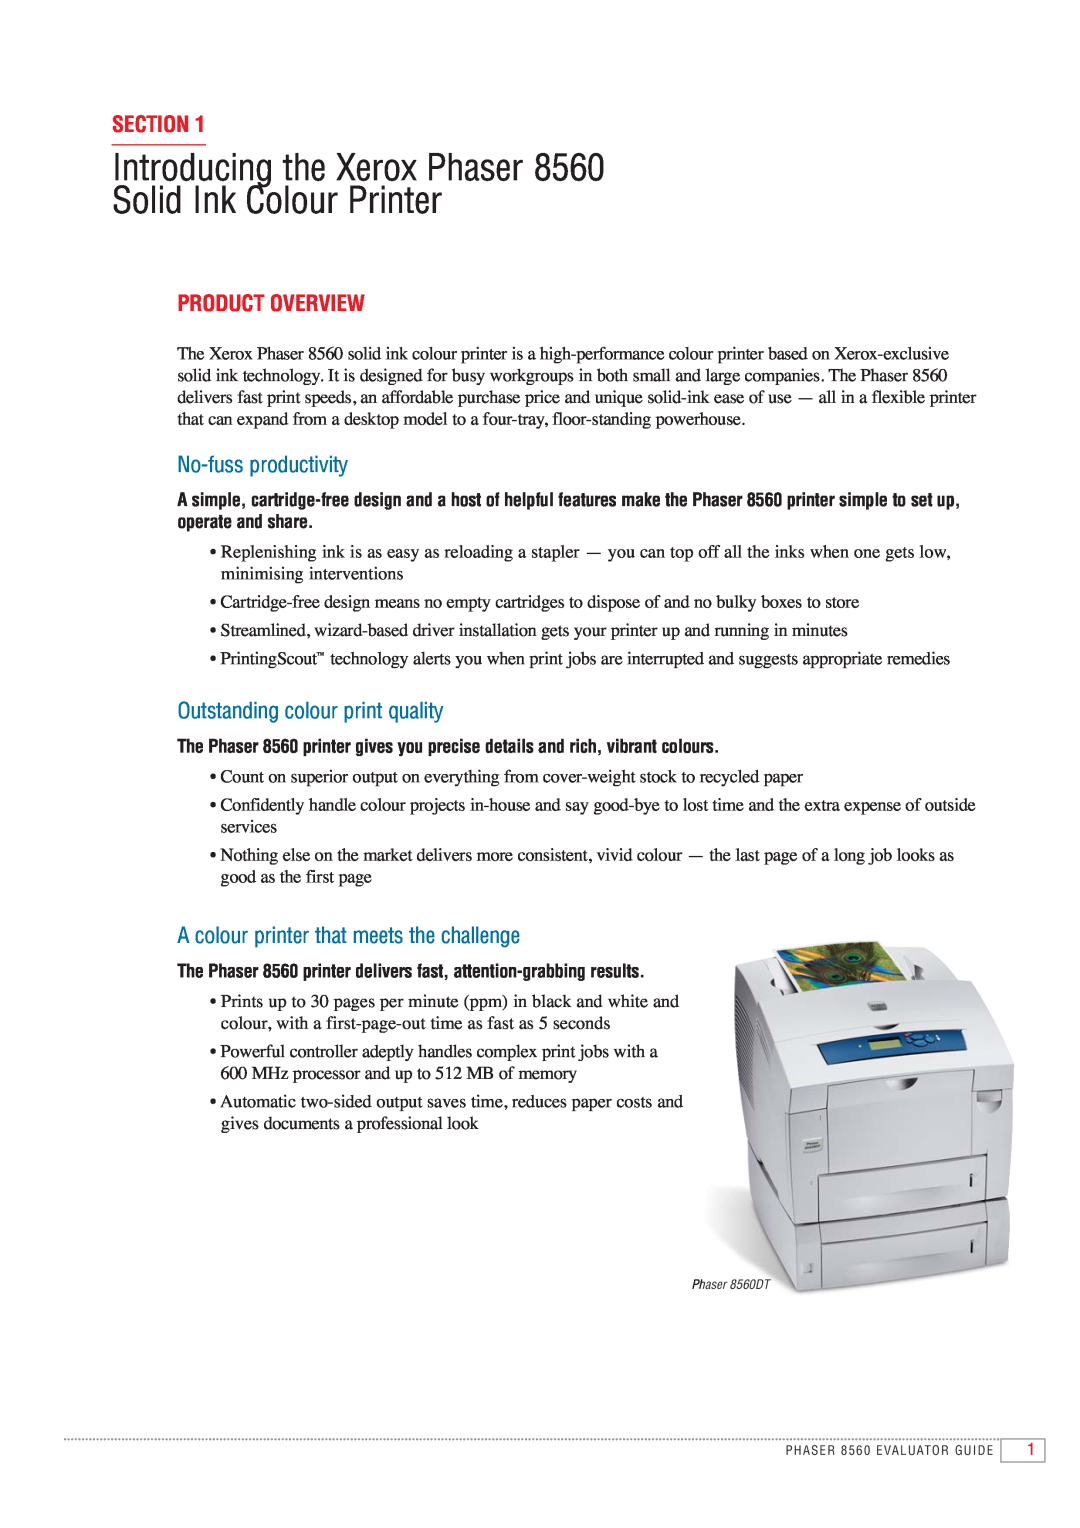 Xerox 8560 manual Introducing the Xerox Phaser Solid Ink Colour Printer, Section, Product Overview, No-fuss productivity 